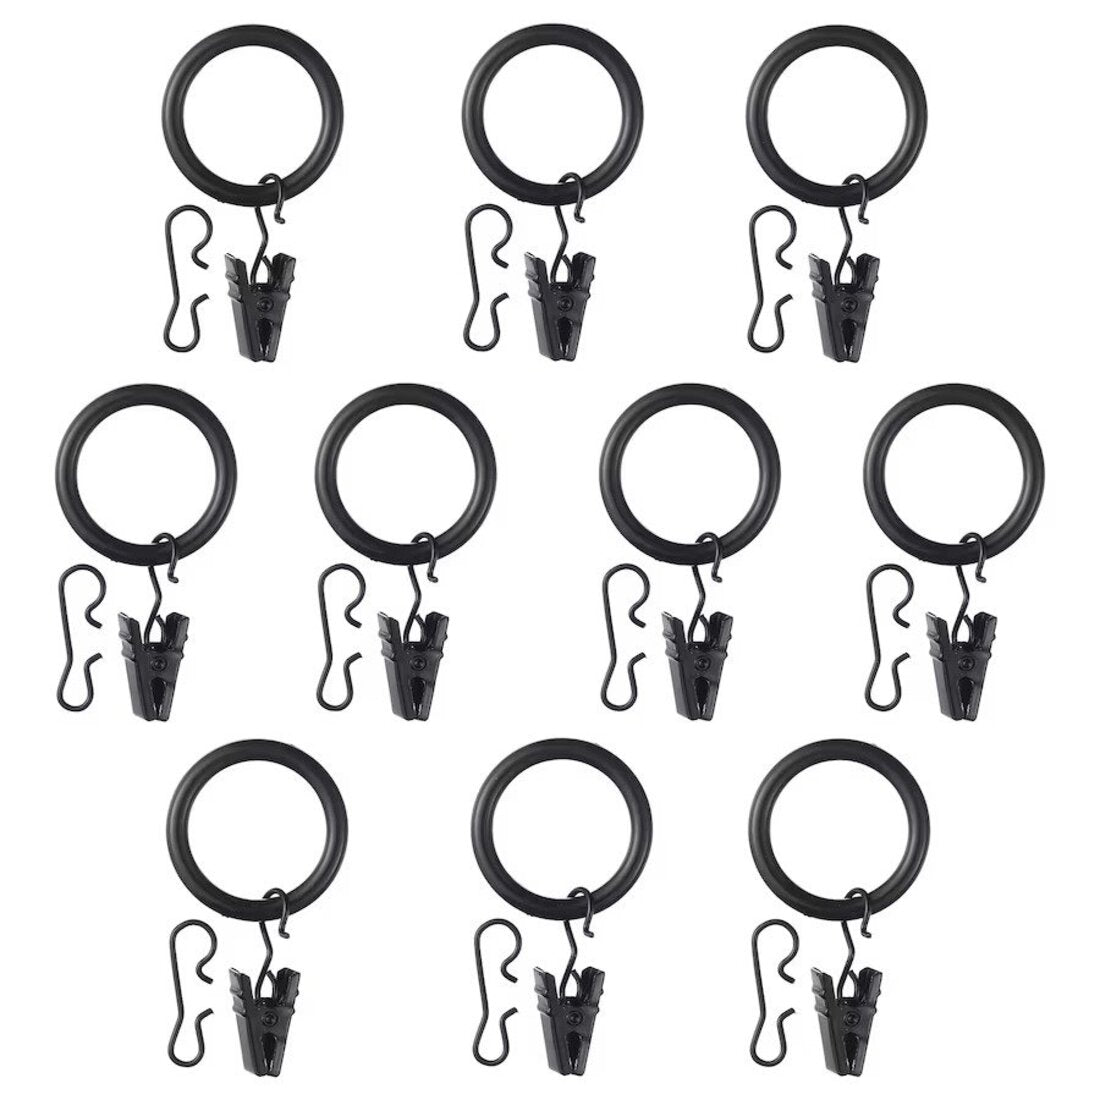 12,722 Curtain Ring Royalty-Free Photos and Stock Images | Shutterstock